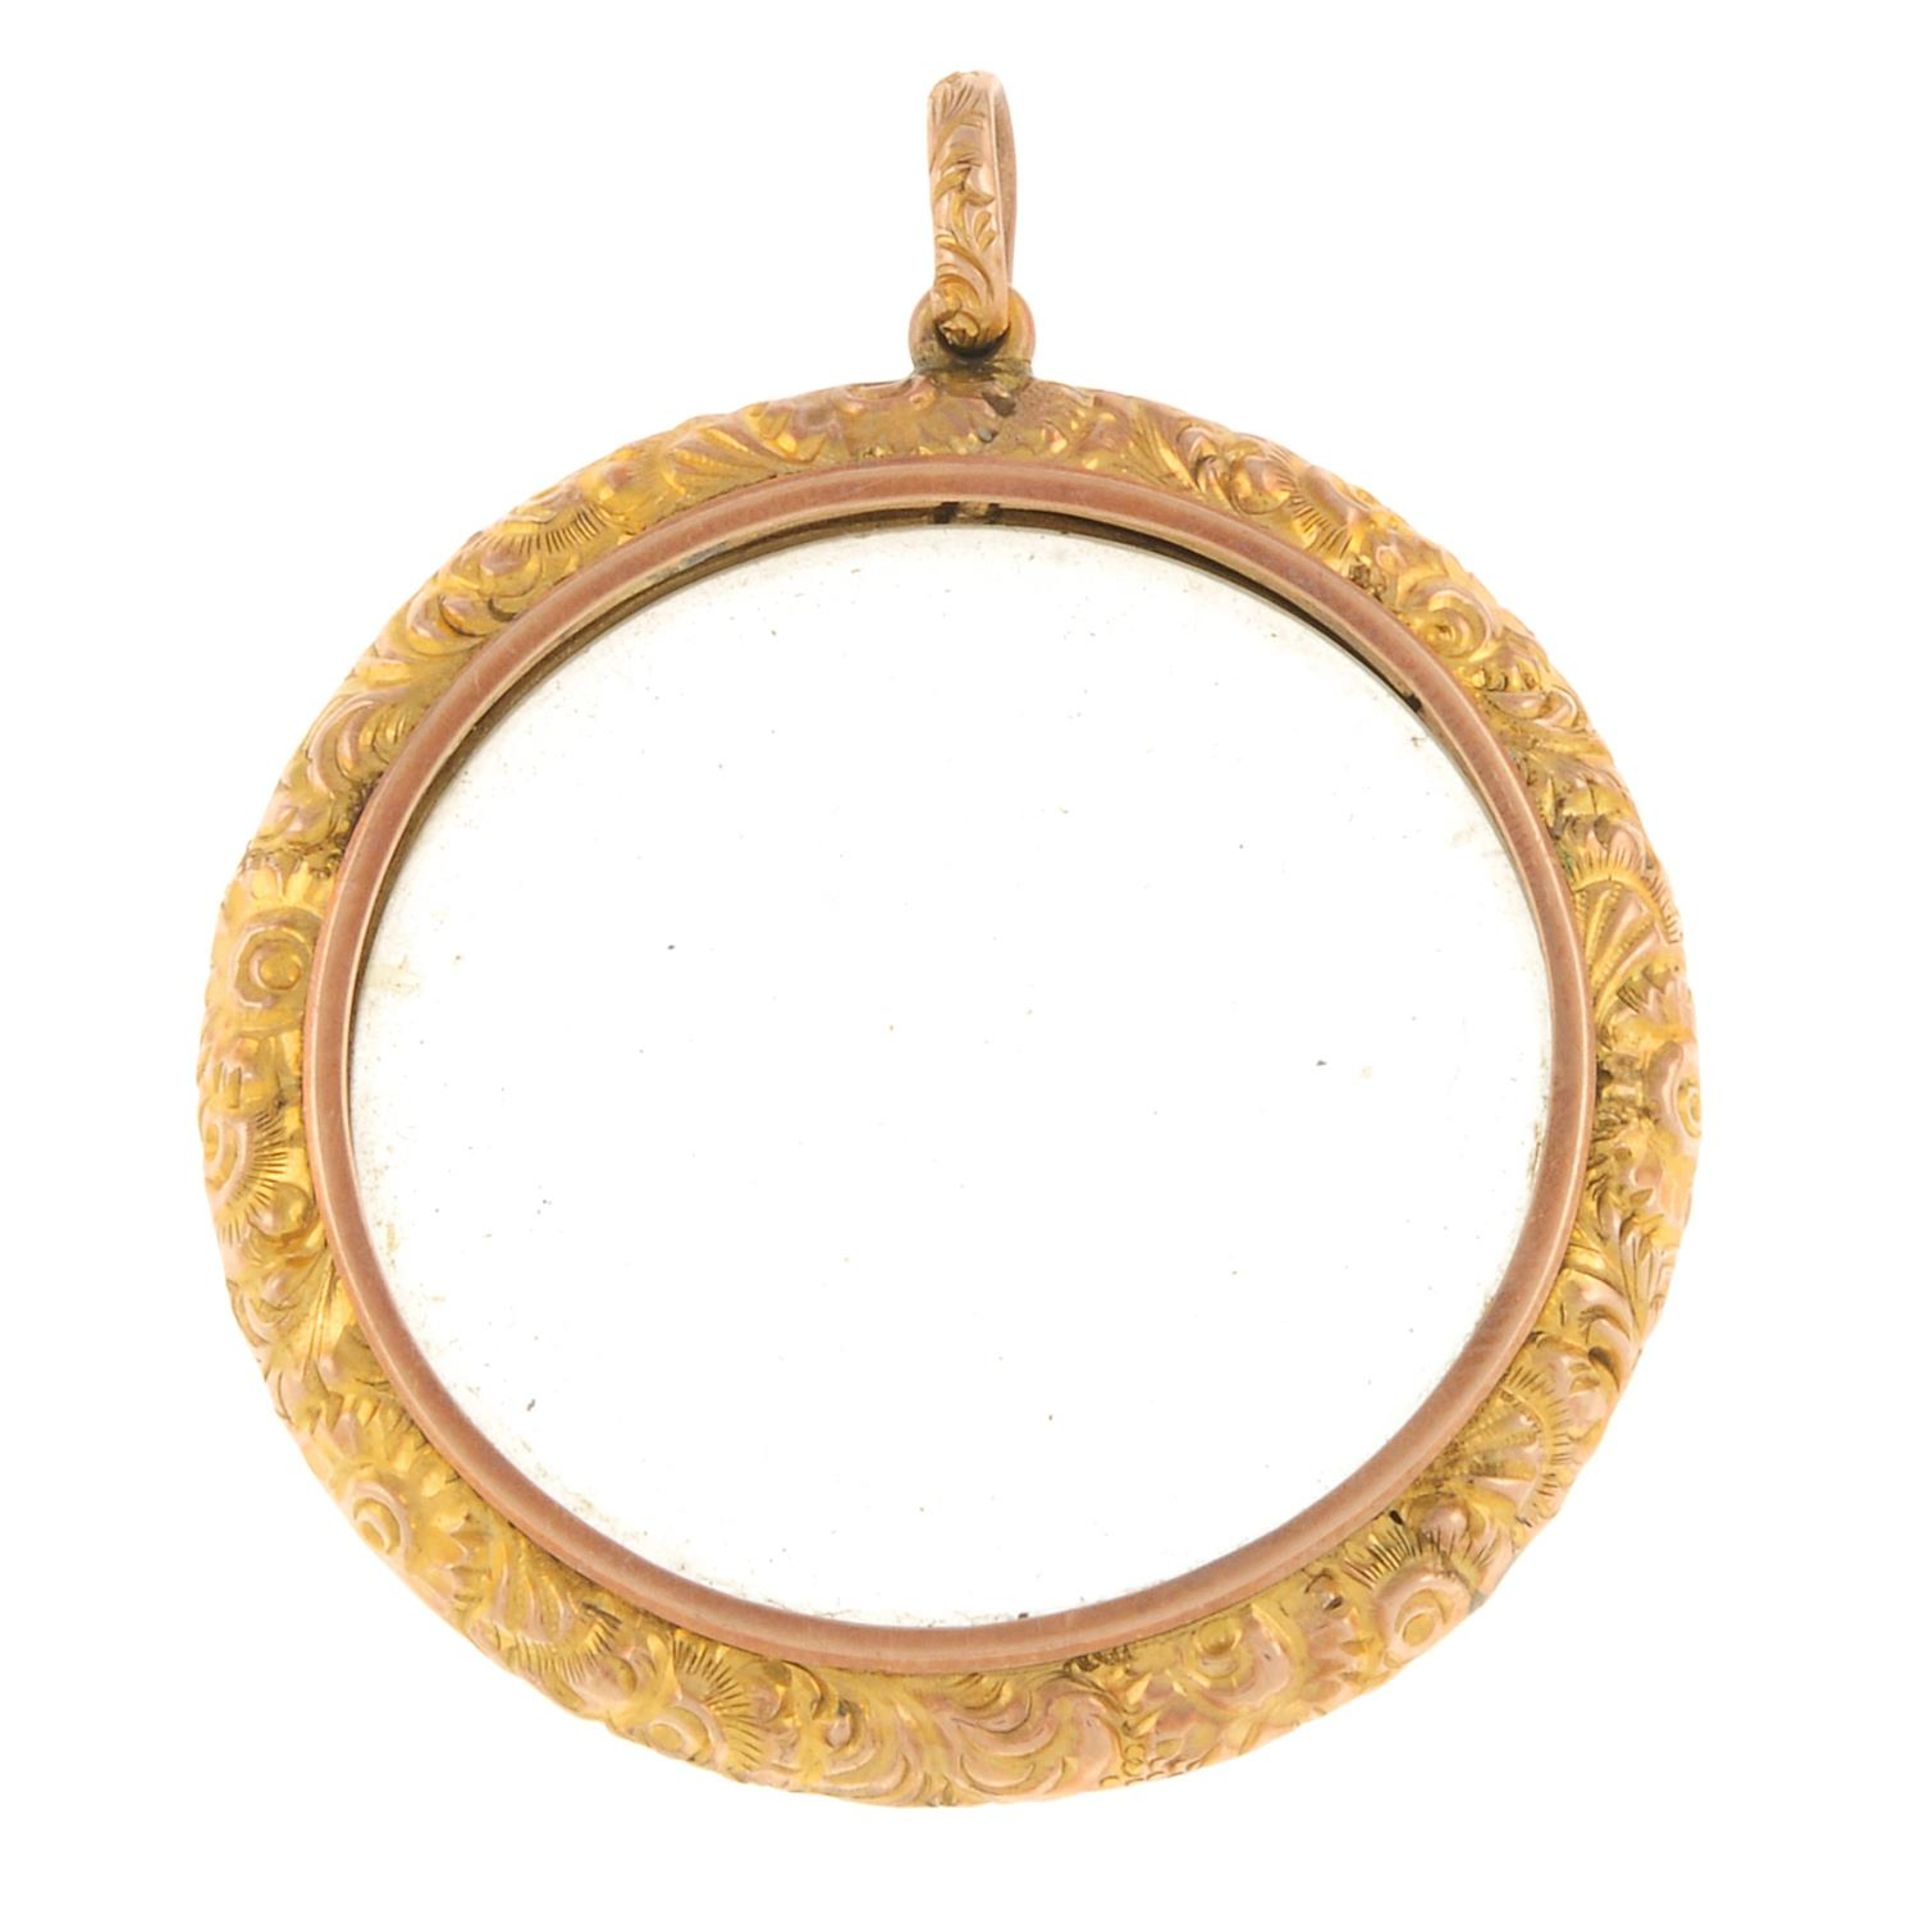 A late 19th century gold locket, with scrolling foliate surround and surmount.